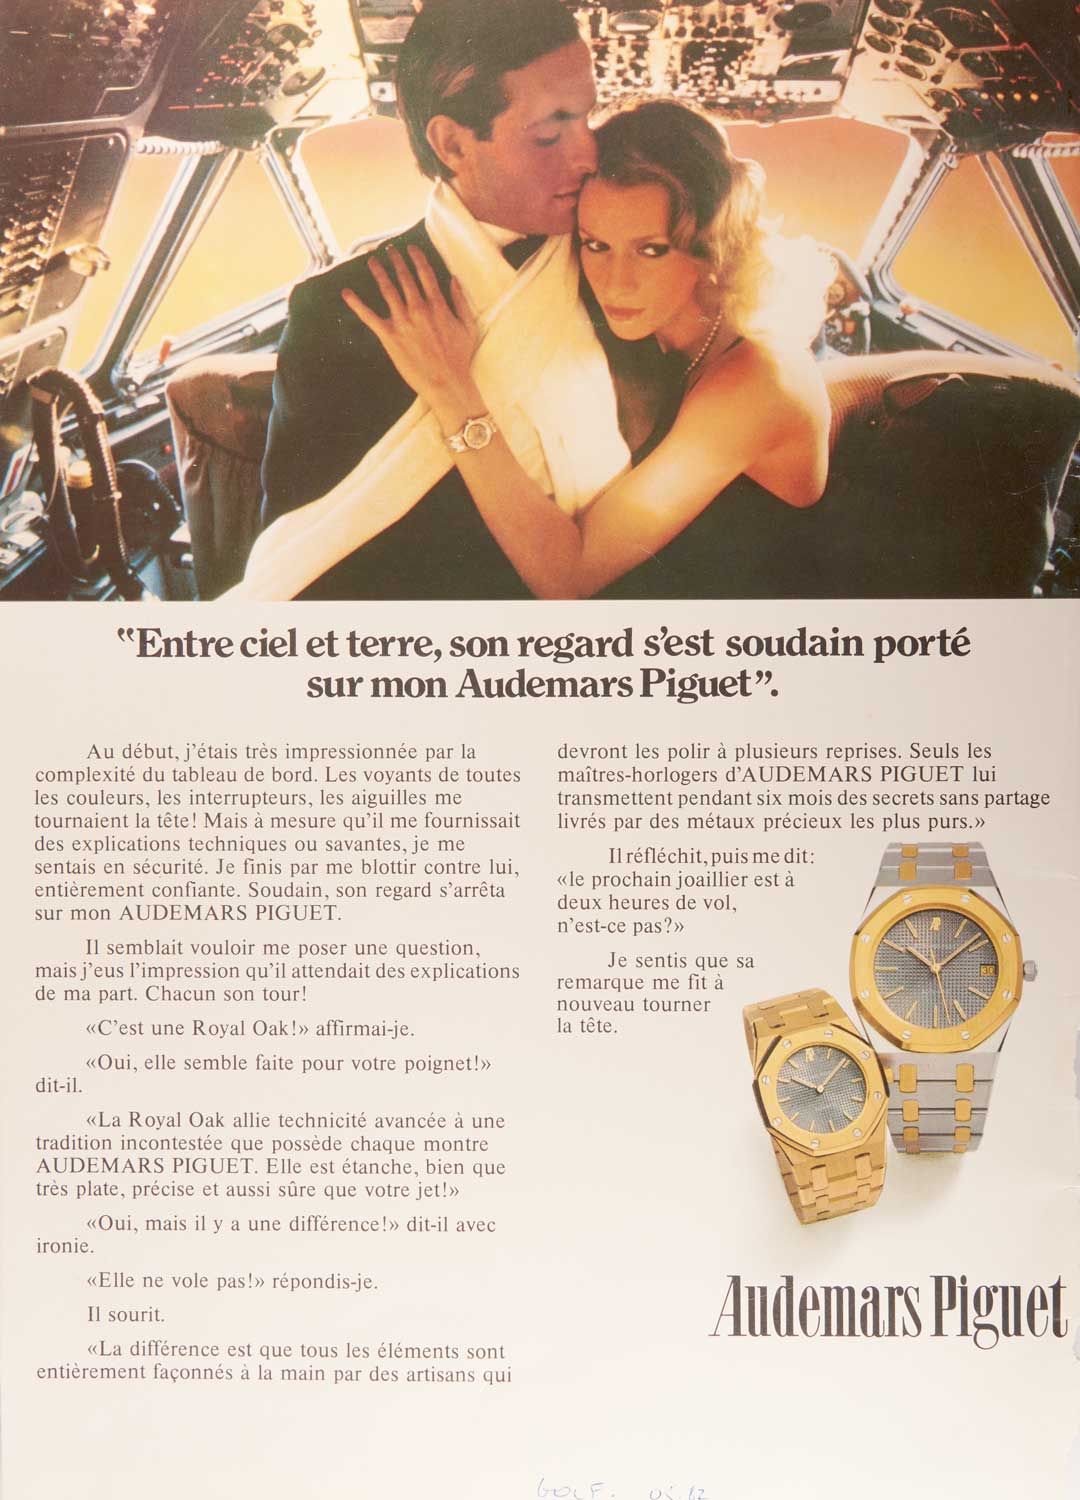 A 1982 advertisement of the mid-sized Royal Oaks targeted at women